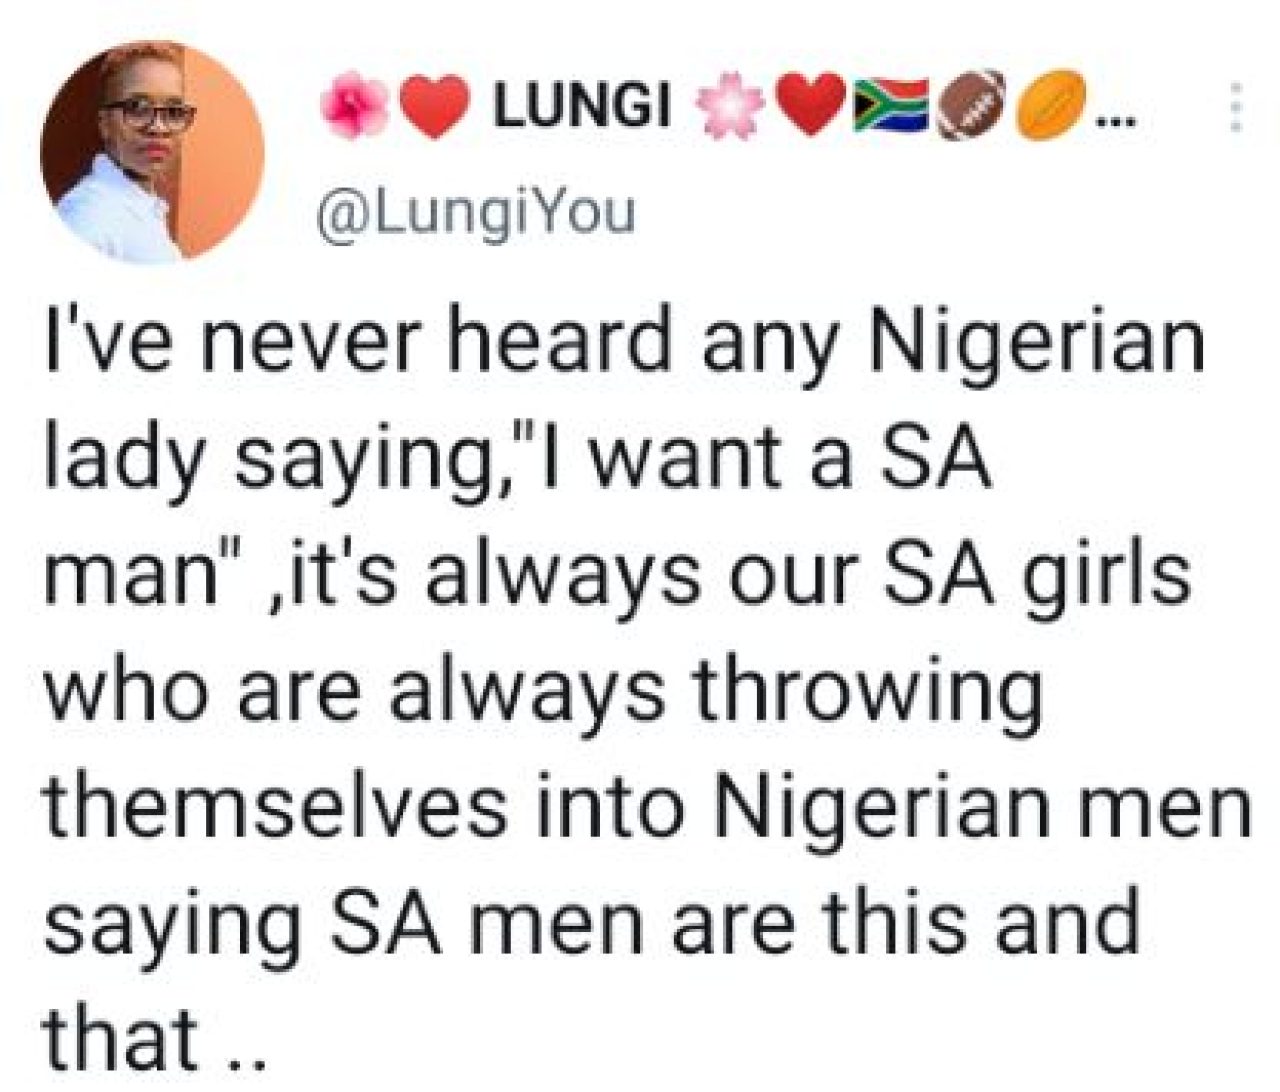 "I've never heard any Nigerian lady say, “I want an SA man”, it's always our girls throwing themselves at Nigerian men. Afro News Wire